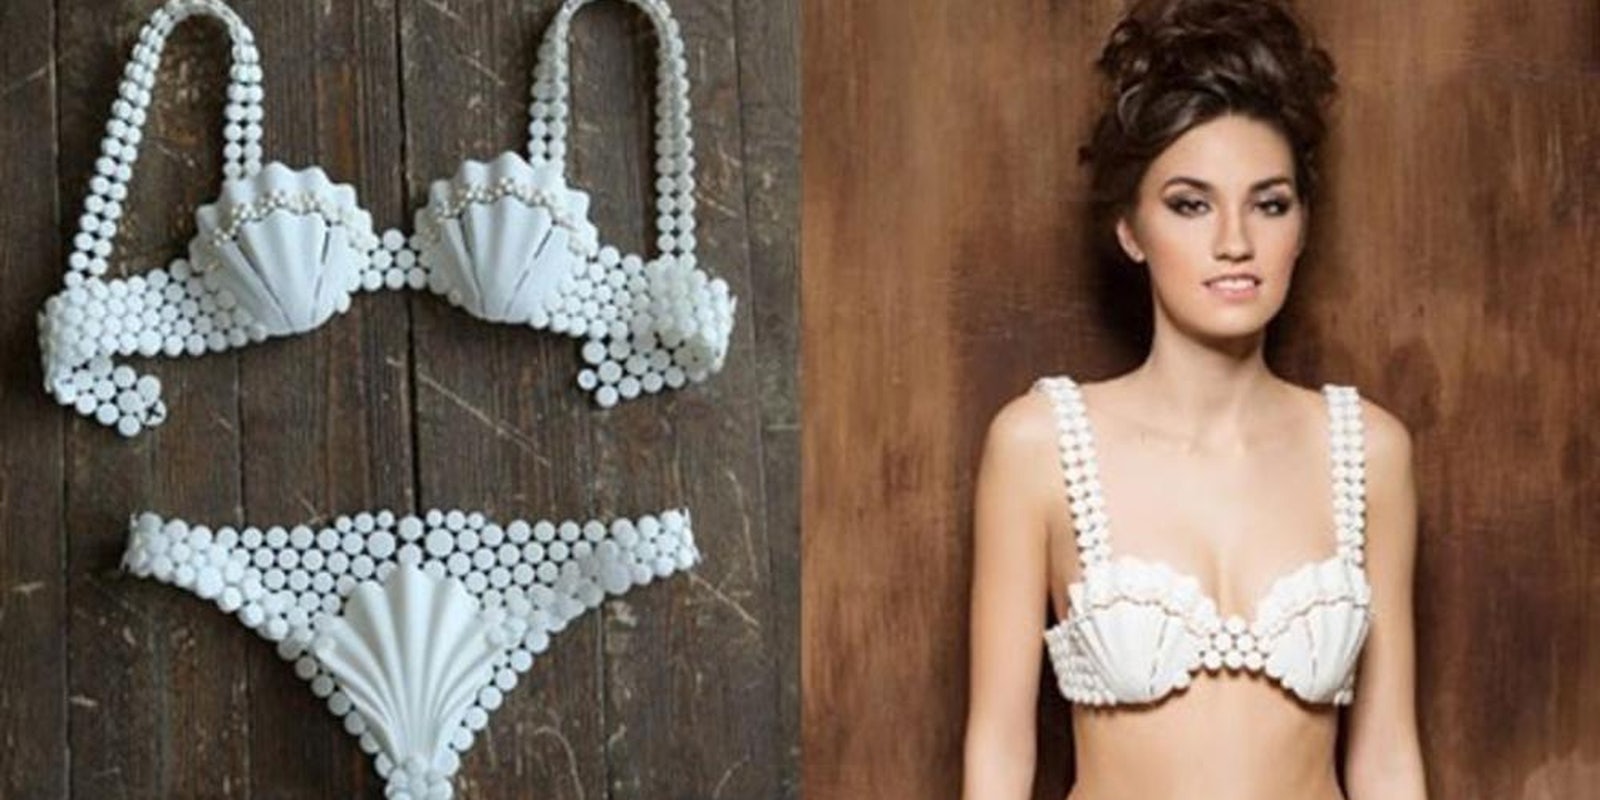 A 3D-printed underwear set is exploiting a loophole in Russian law